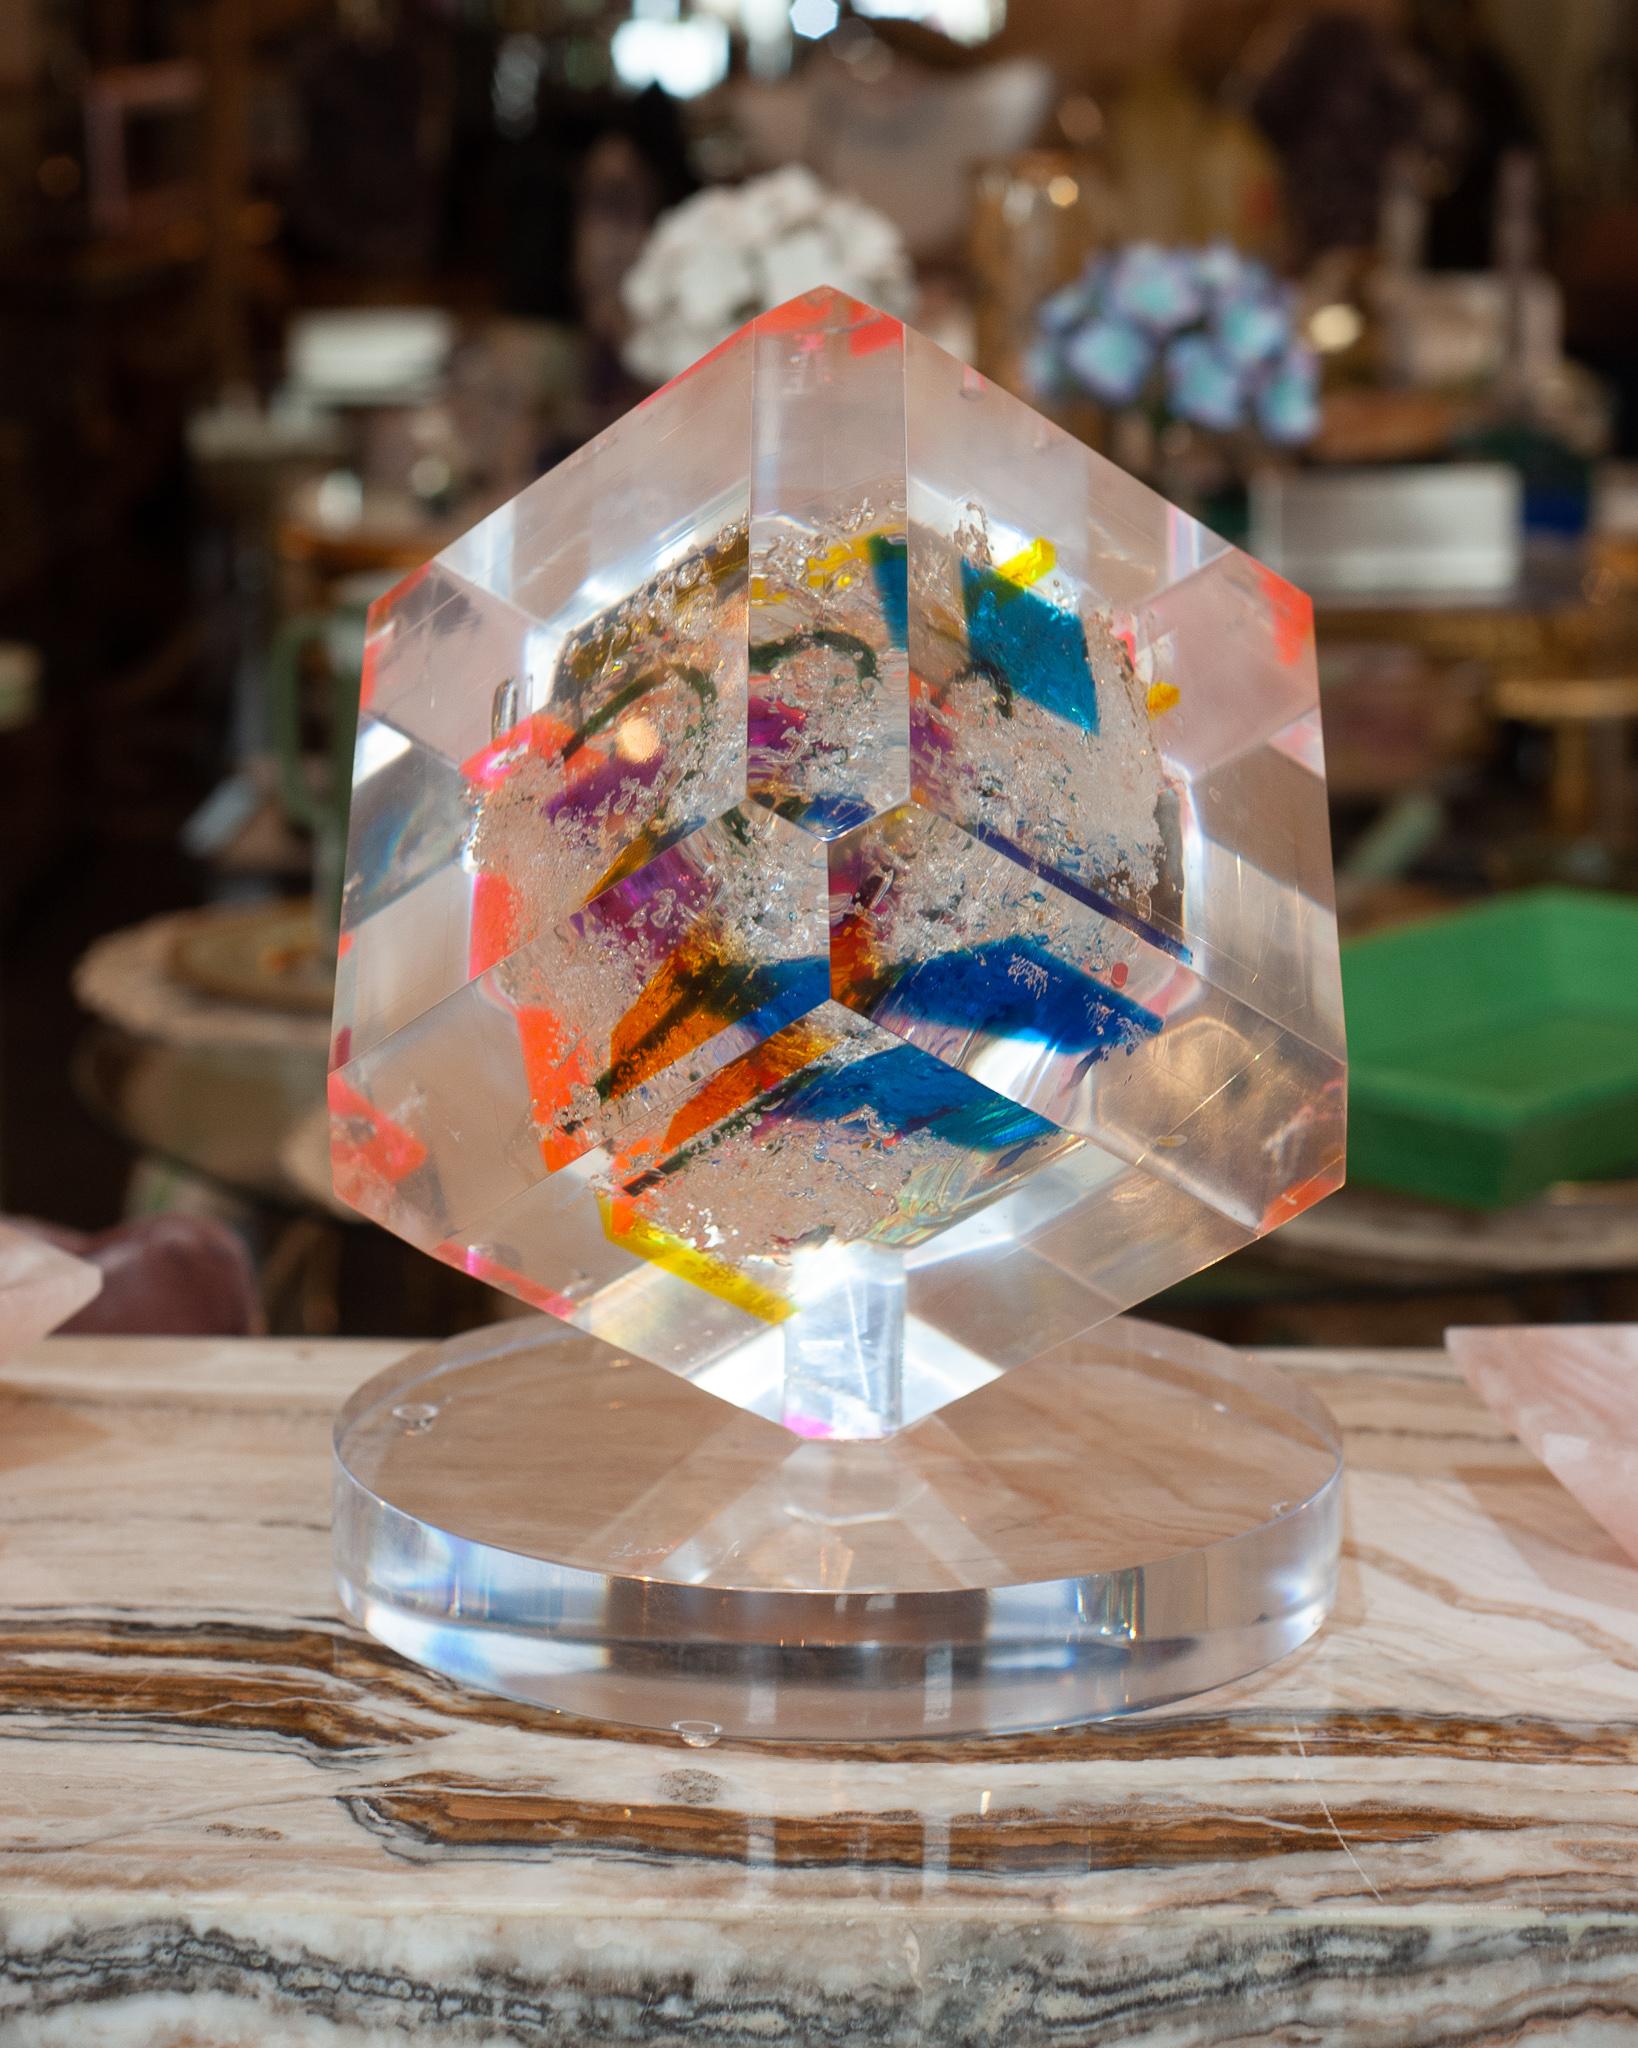 A large acrylic cube sculpture in multicoloured cast acrylic by a Cuban artist. Cast entirely in clear acrylic with splashes of pinks, blue, oranges, yellows and greens, this vibrant sculpture catches the light beautifully. It is a modern and